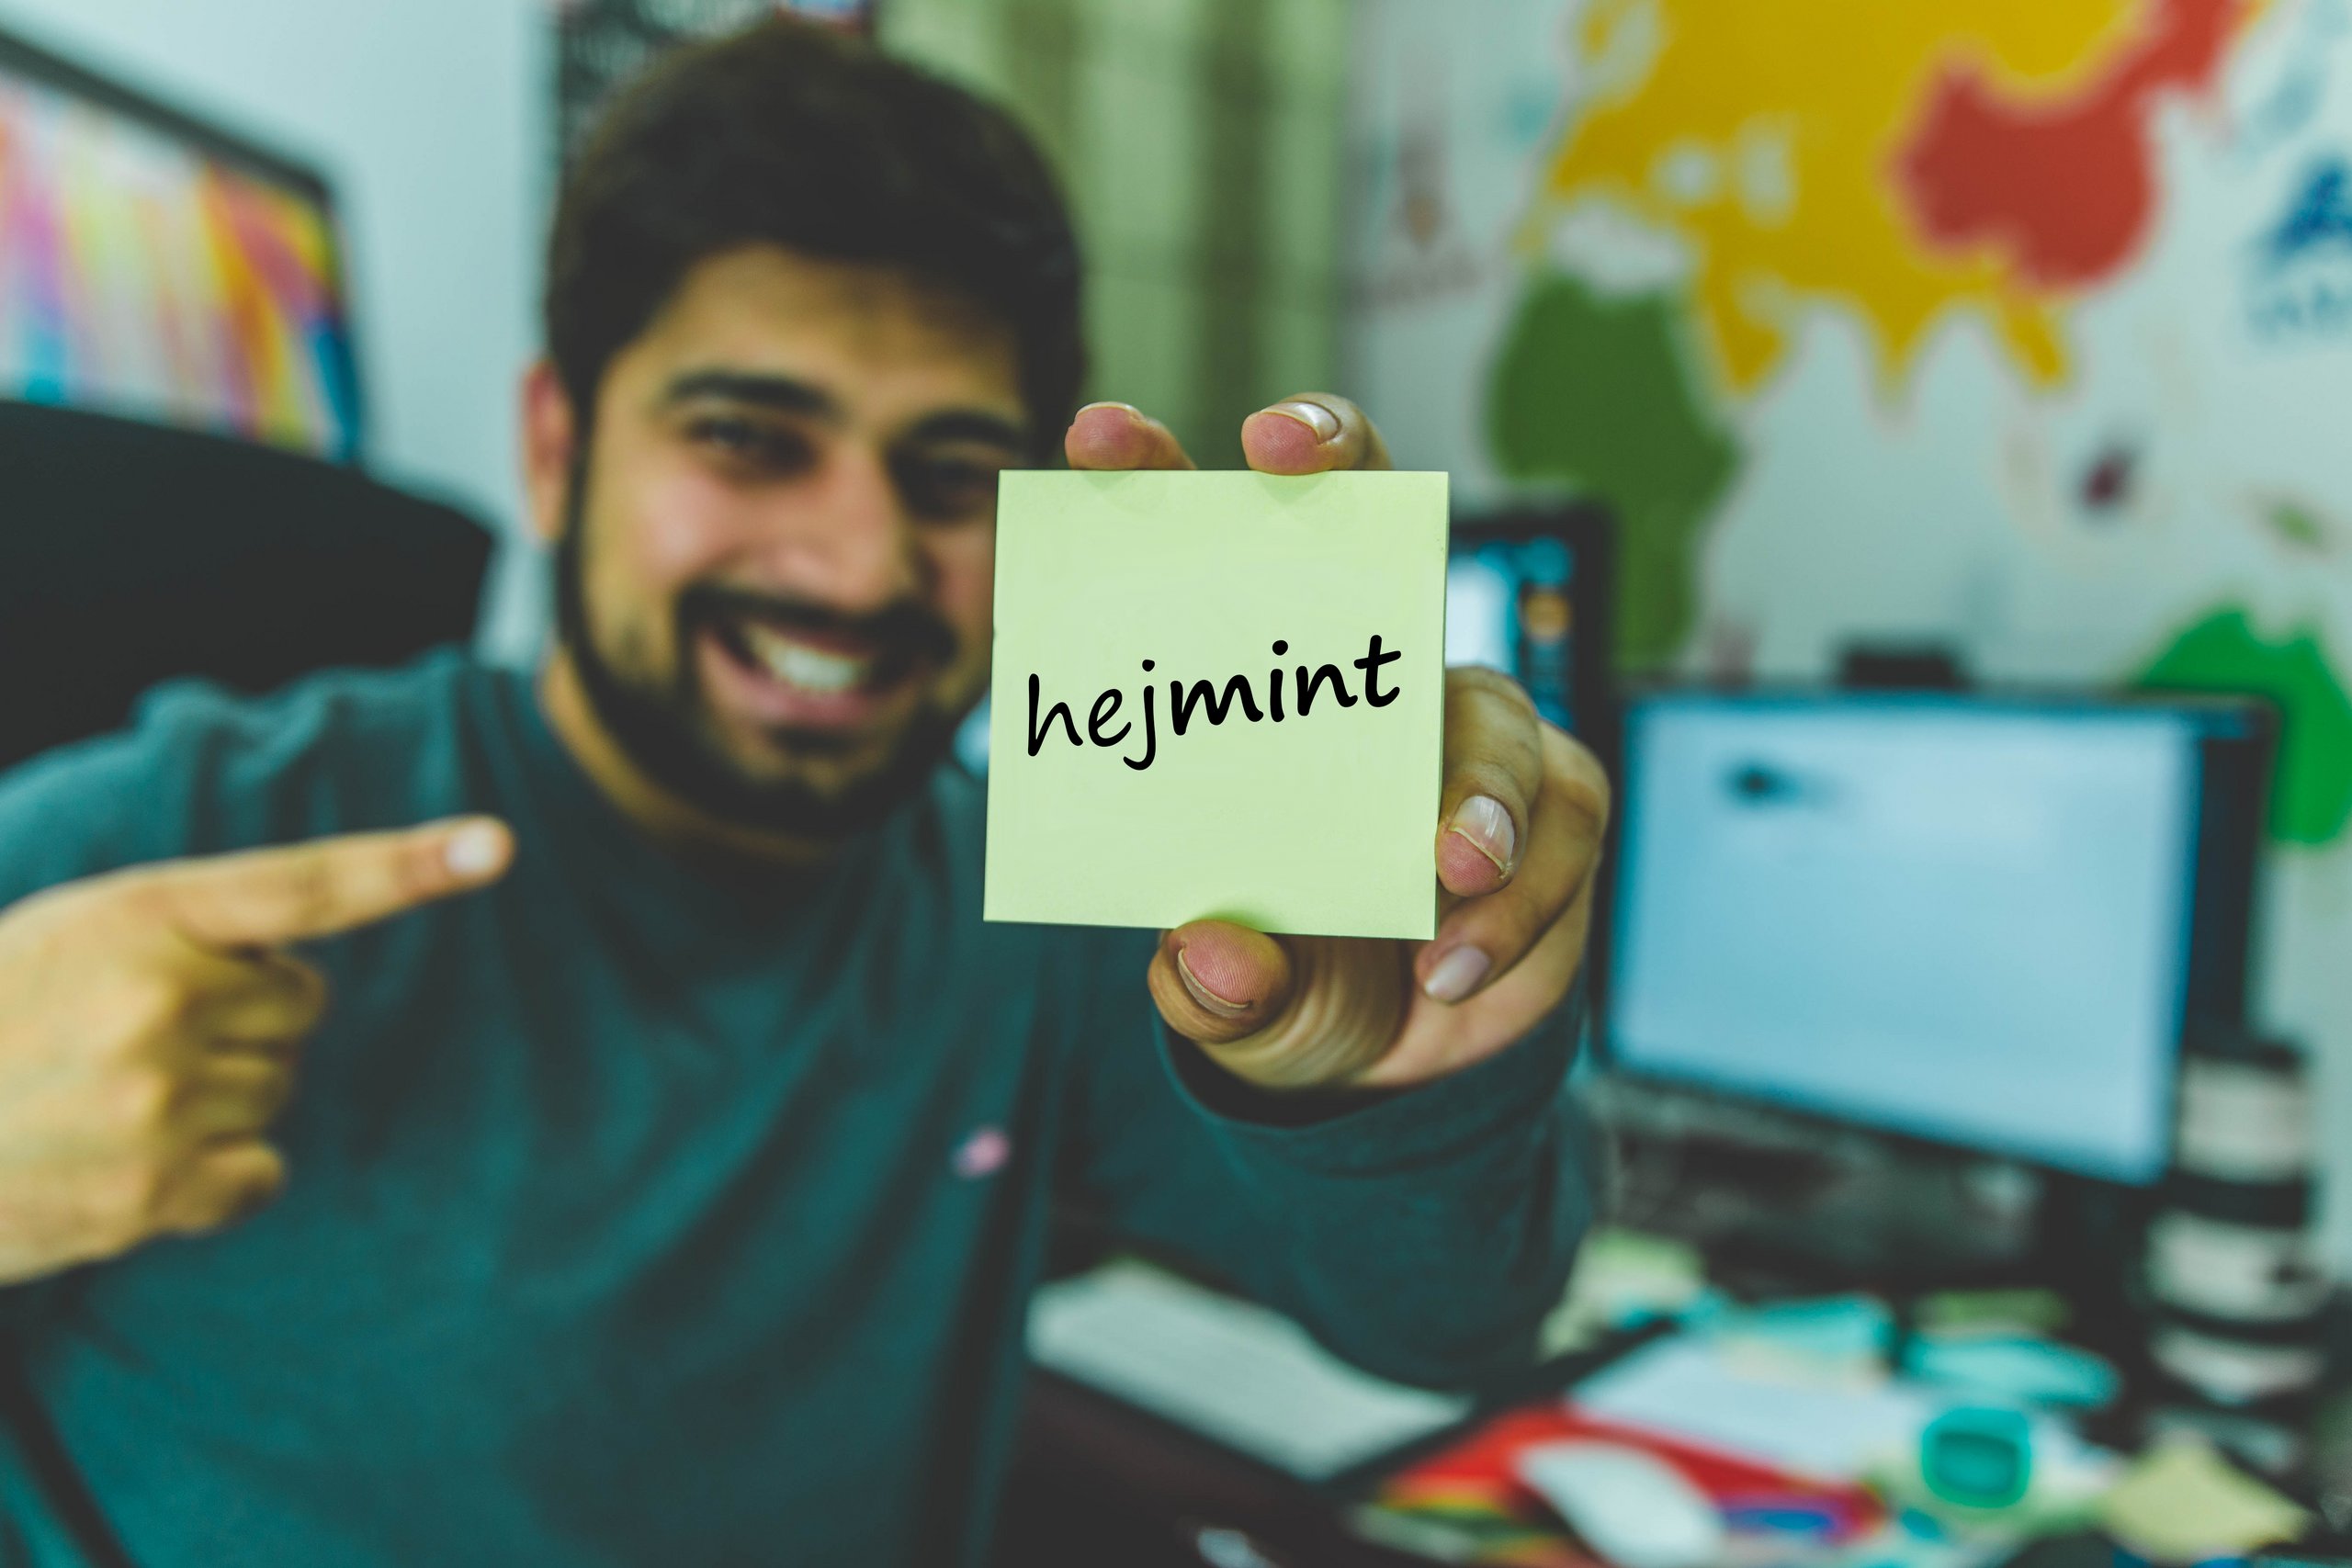 Trial study programme or trial training and only then decide? With the hejmint orientation programme, you can try things out first and find out what suits you.